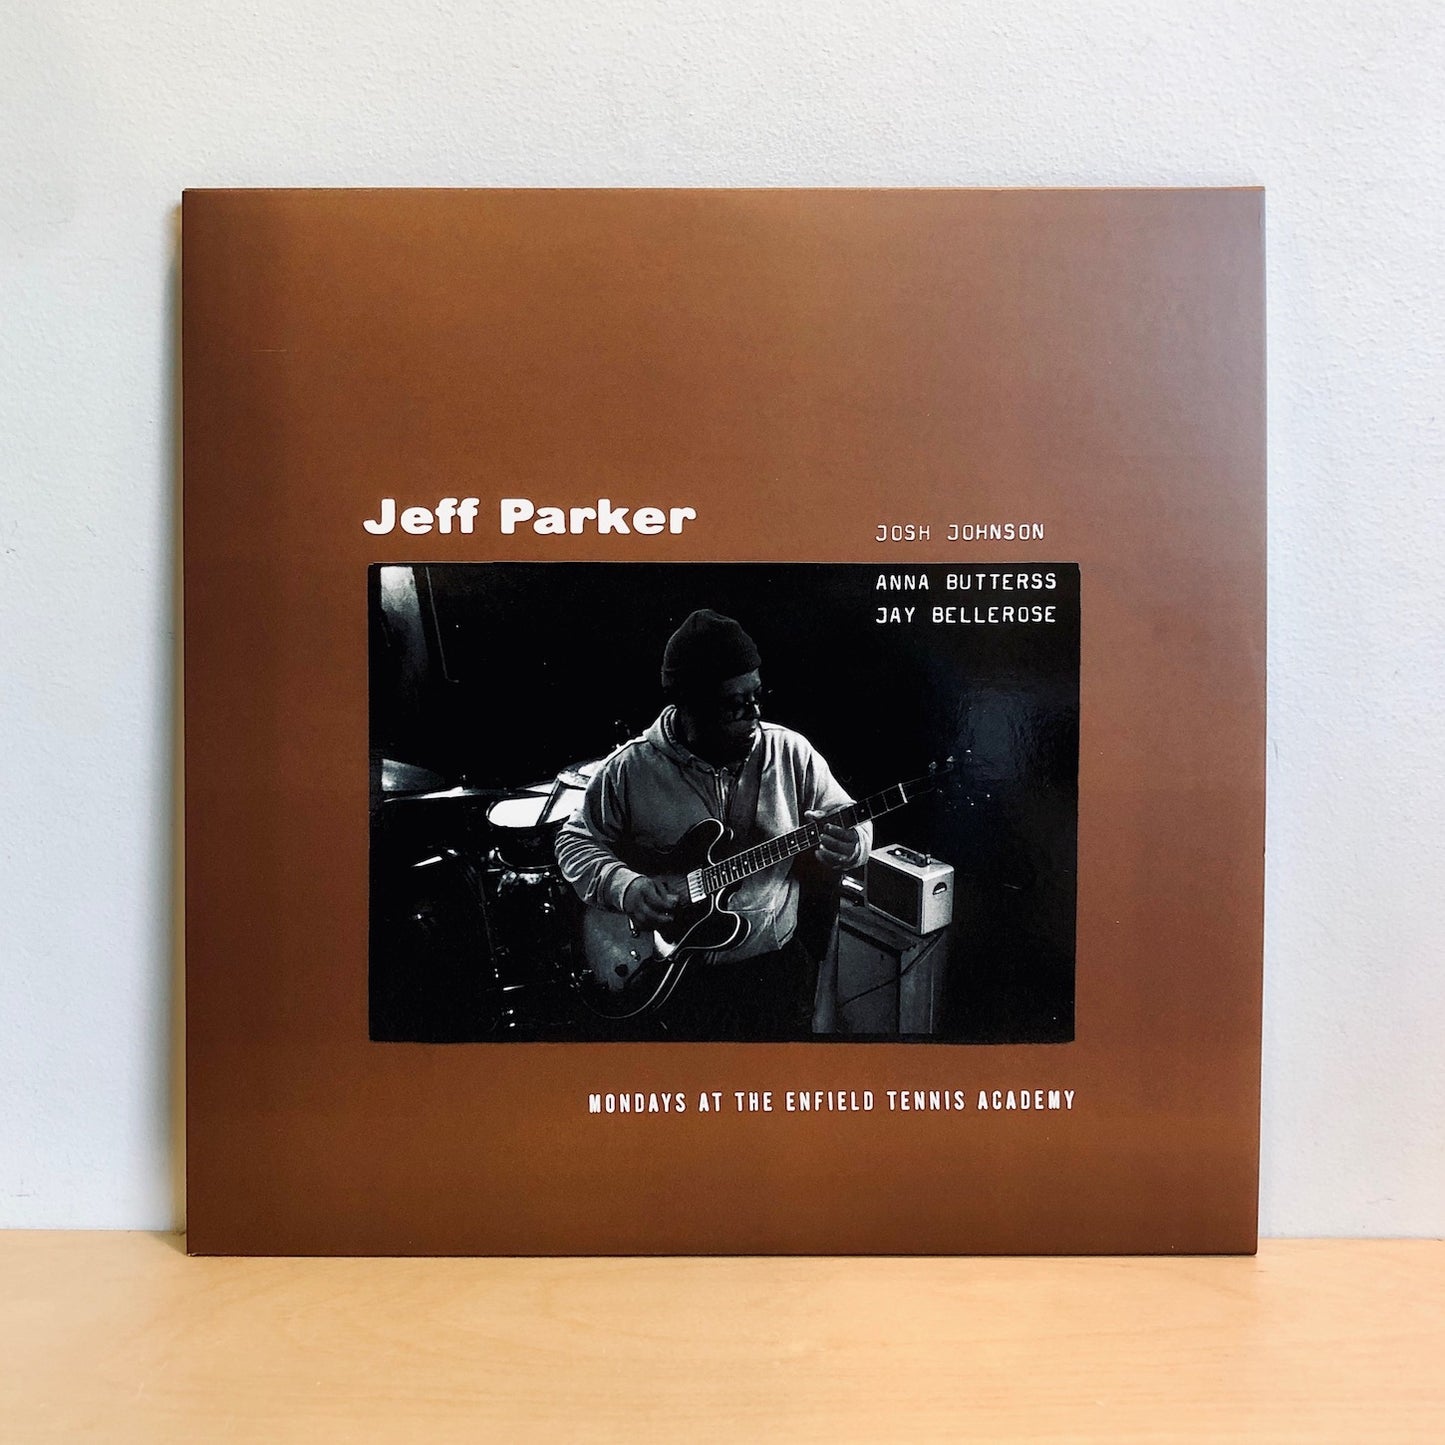 Load image into Gallery viewer, Jeff Parker - Mondays at The Enfield Tennis Academy. 2LP [USA IMPORT]
